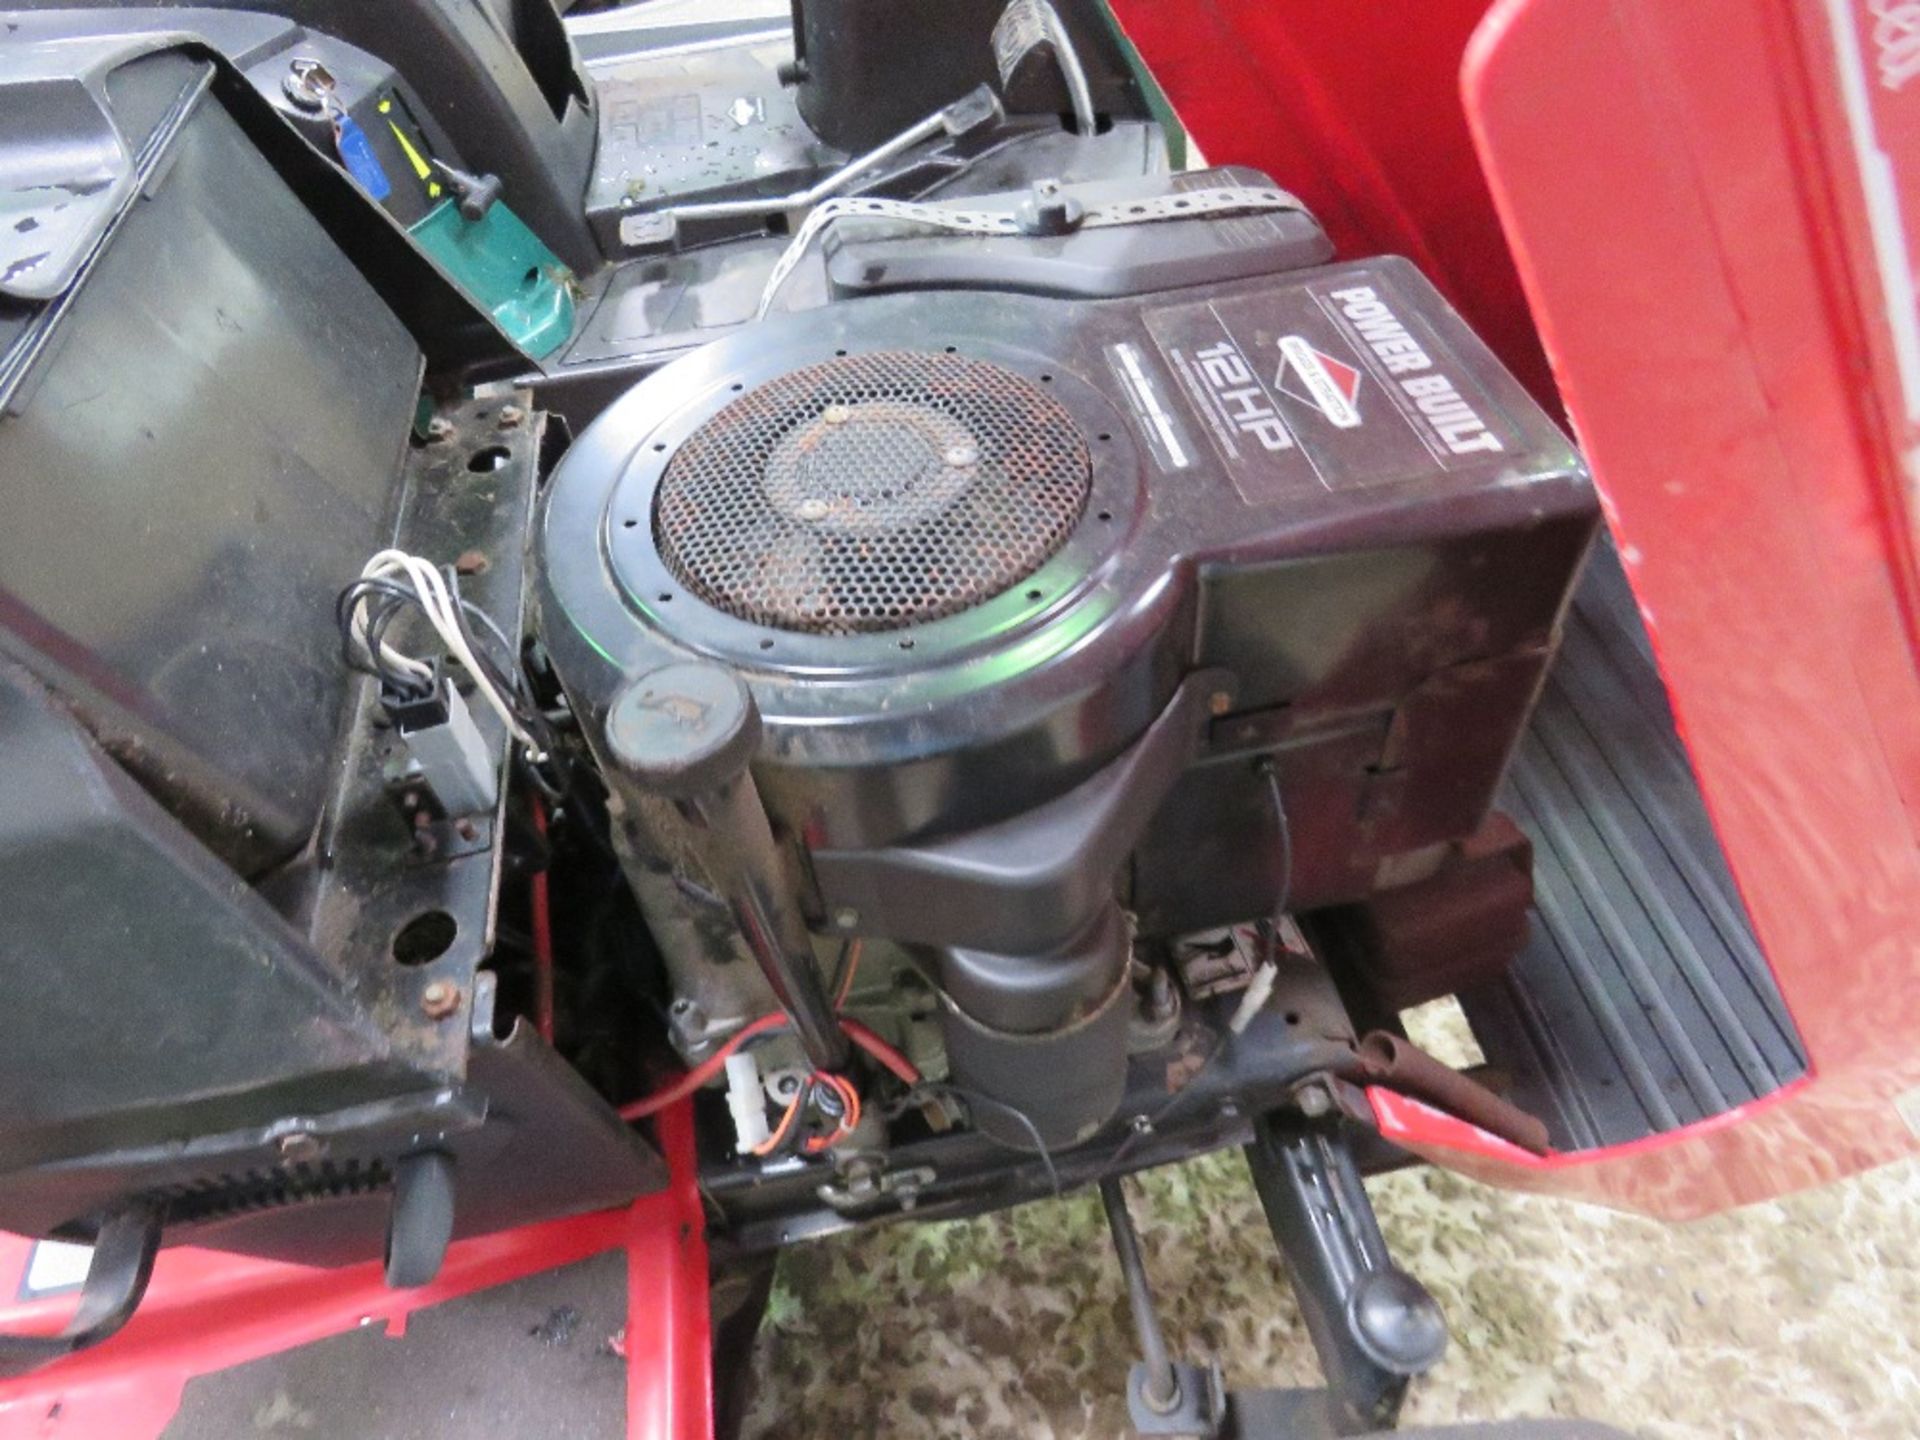 RALLY 12HP RIDE ON MOWER. WHEN BRIEFLY TESTED WAS SEEN TO RUN AND MOWERS ENGAGED. - Image 7 of 7